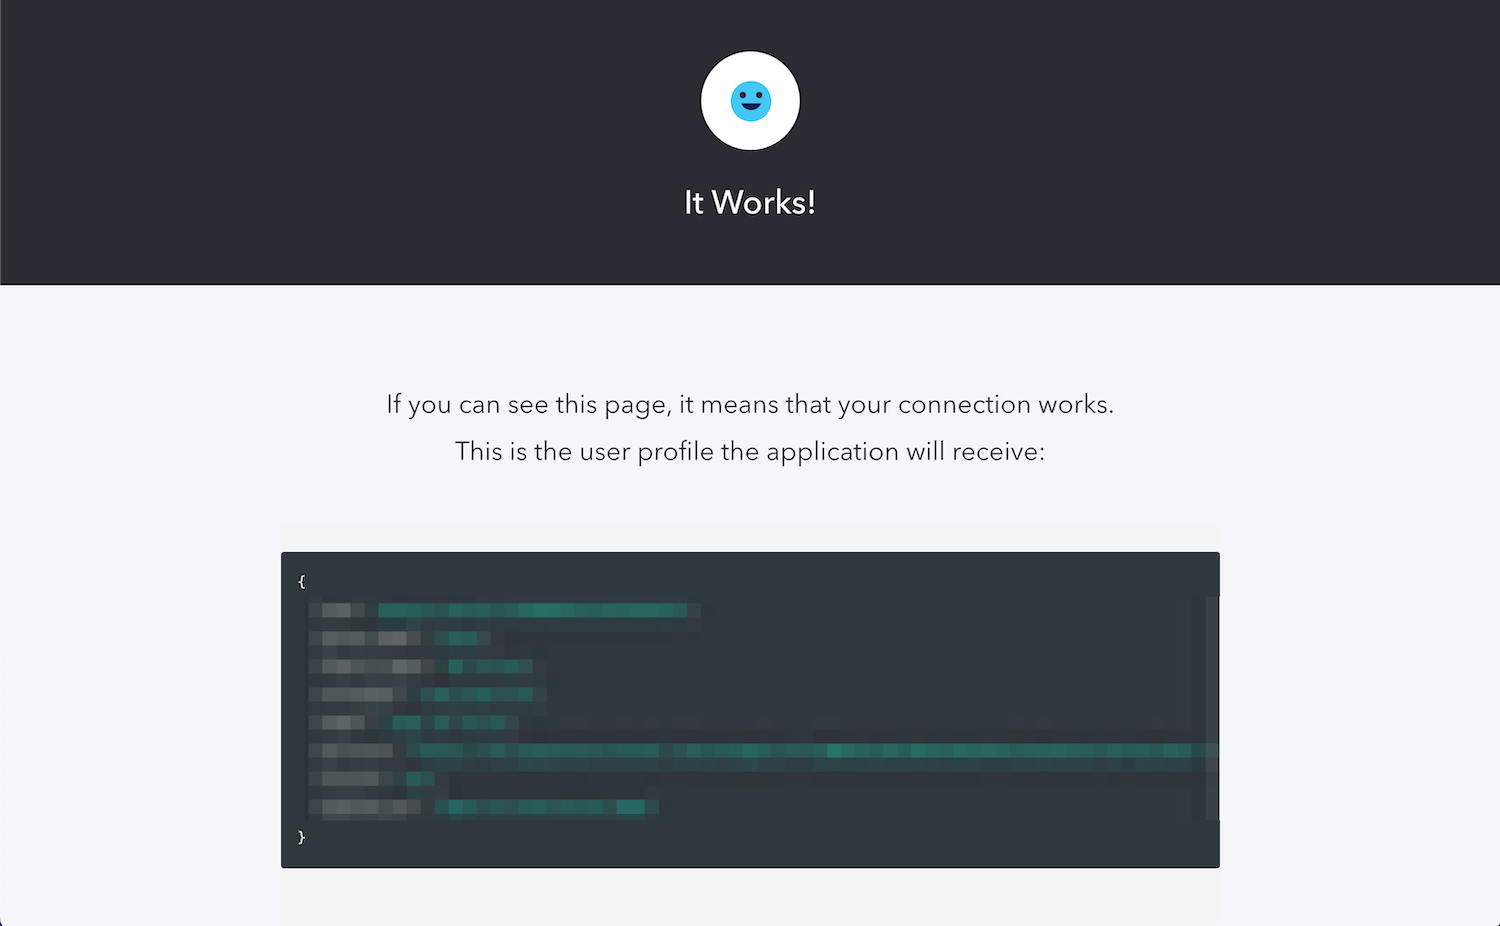 The "It Works!" page, with the JSON containing user details, blurred out.